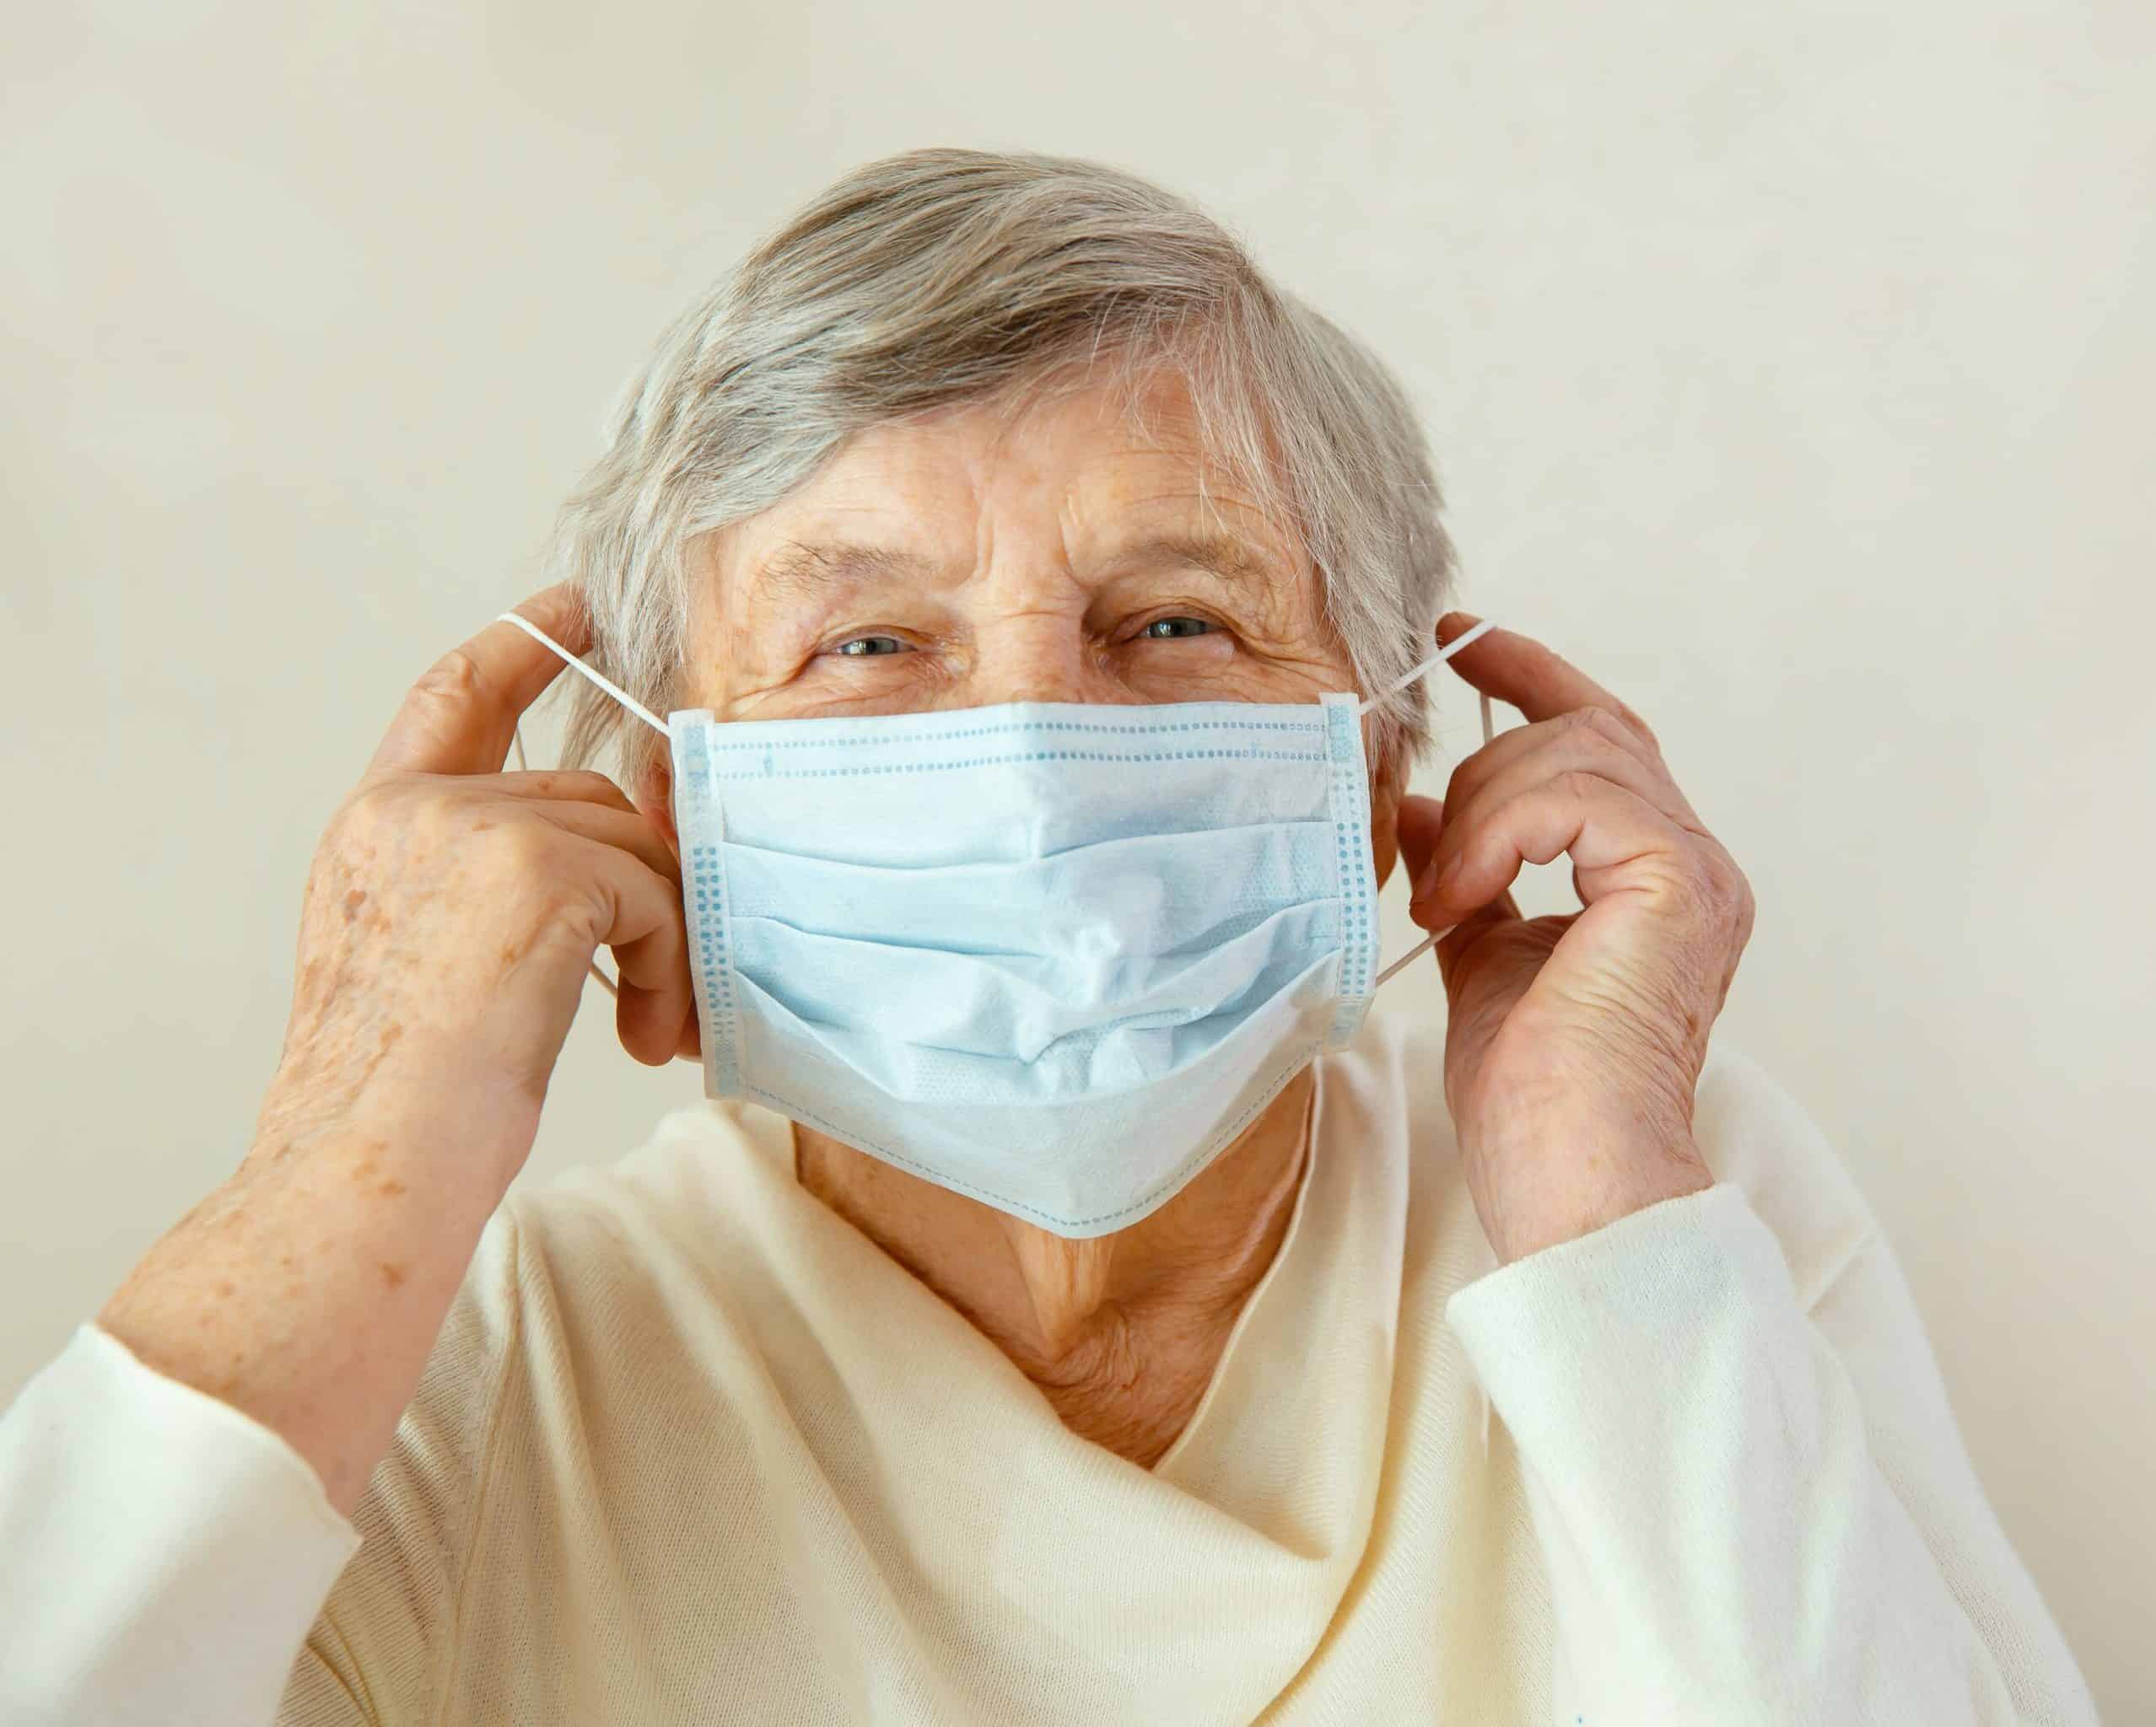 An elderly woman puts a medical mask on her face.